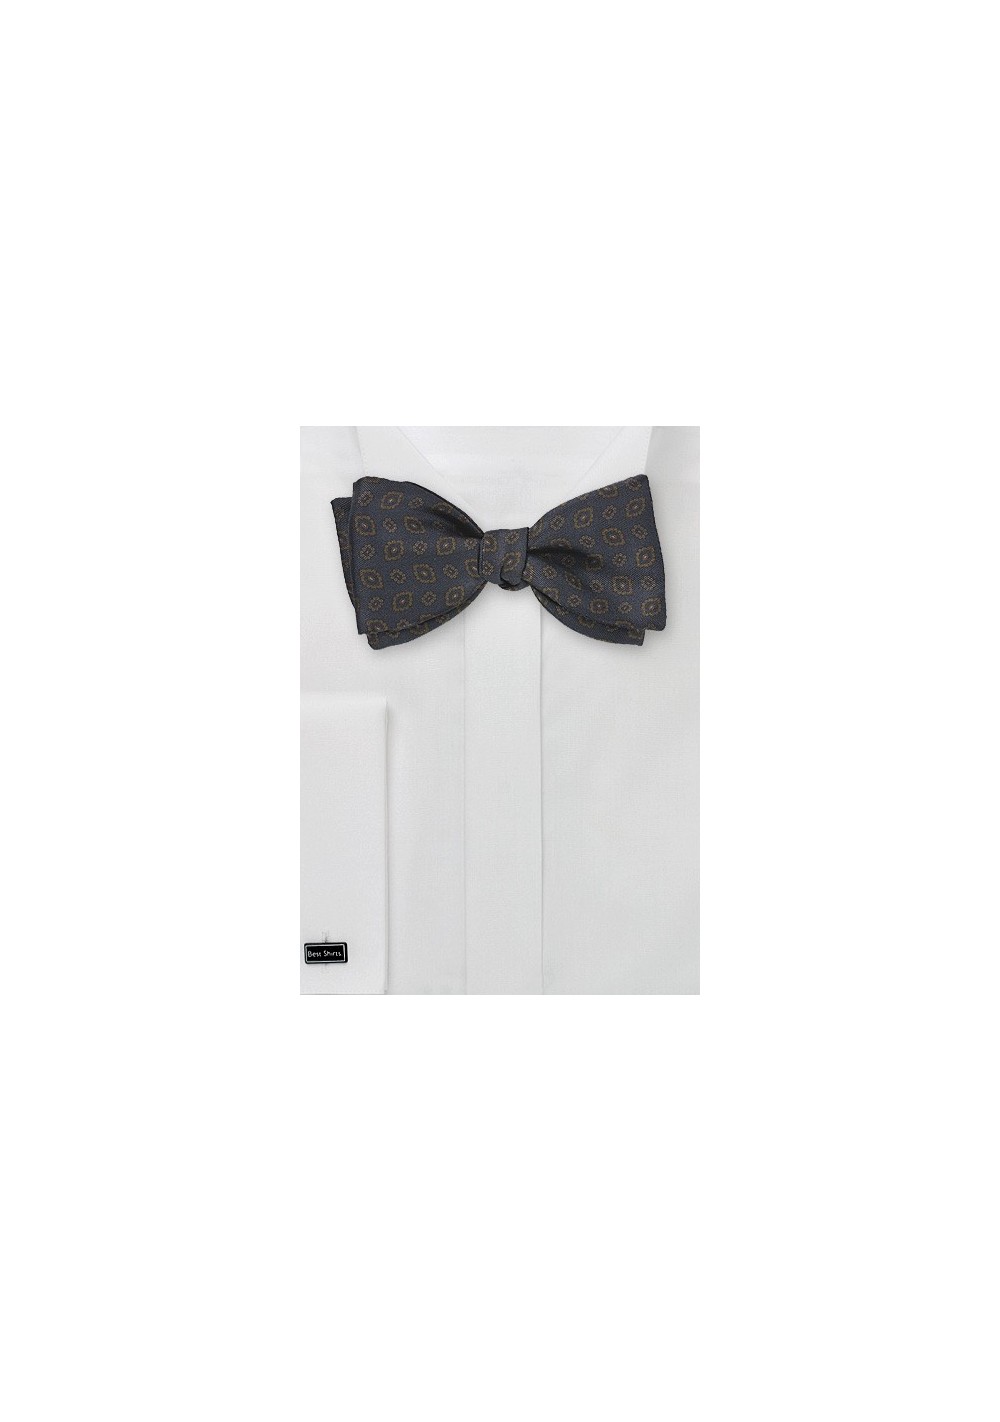 Uber Regal Bow Tie in Navy and Copper